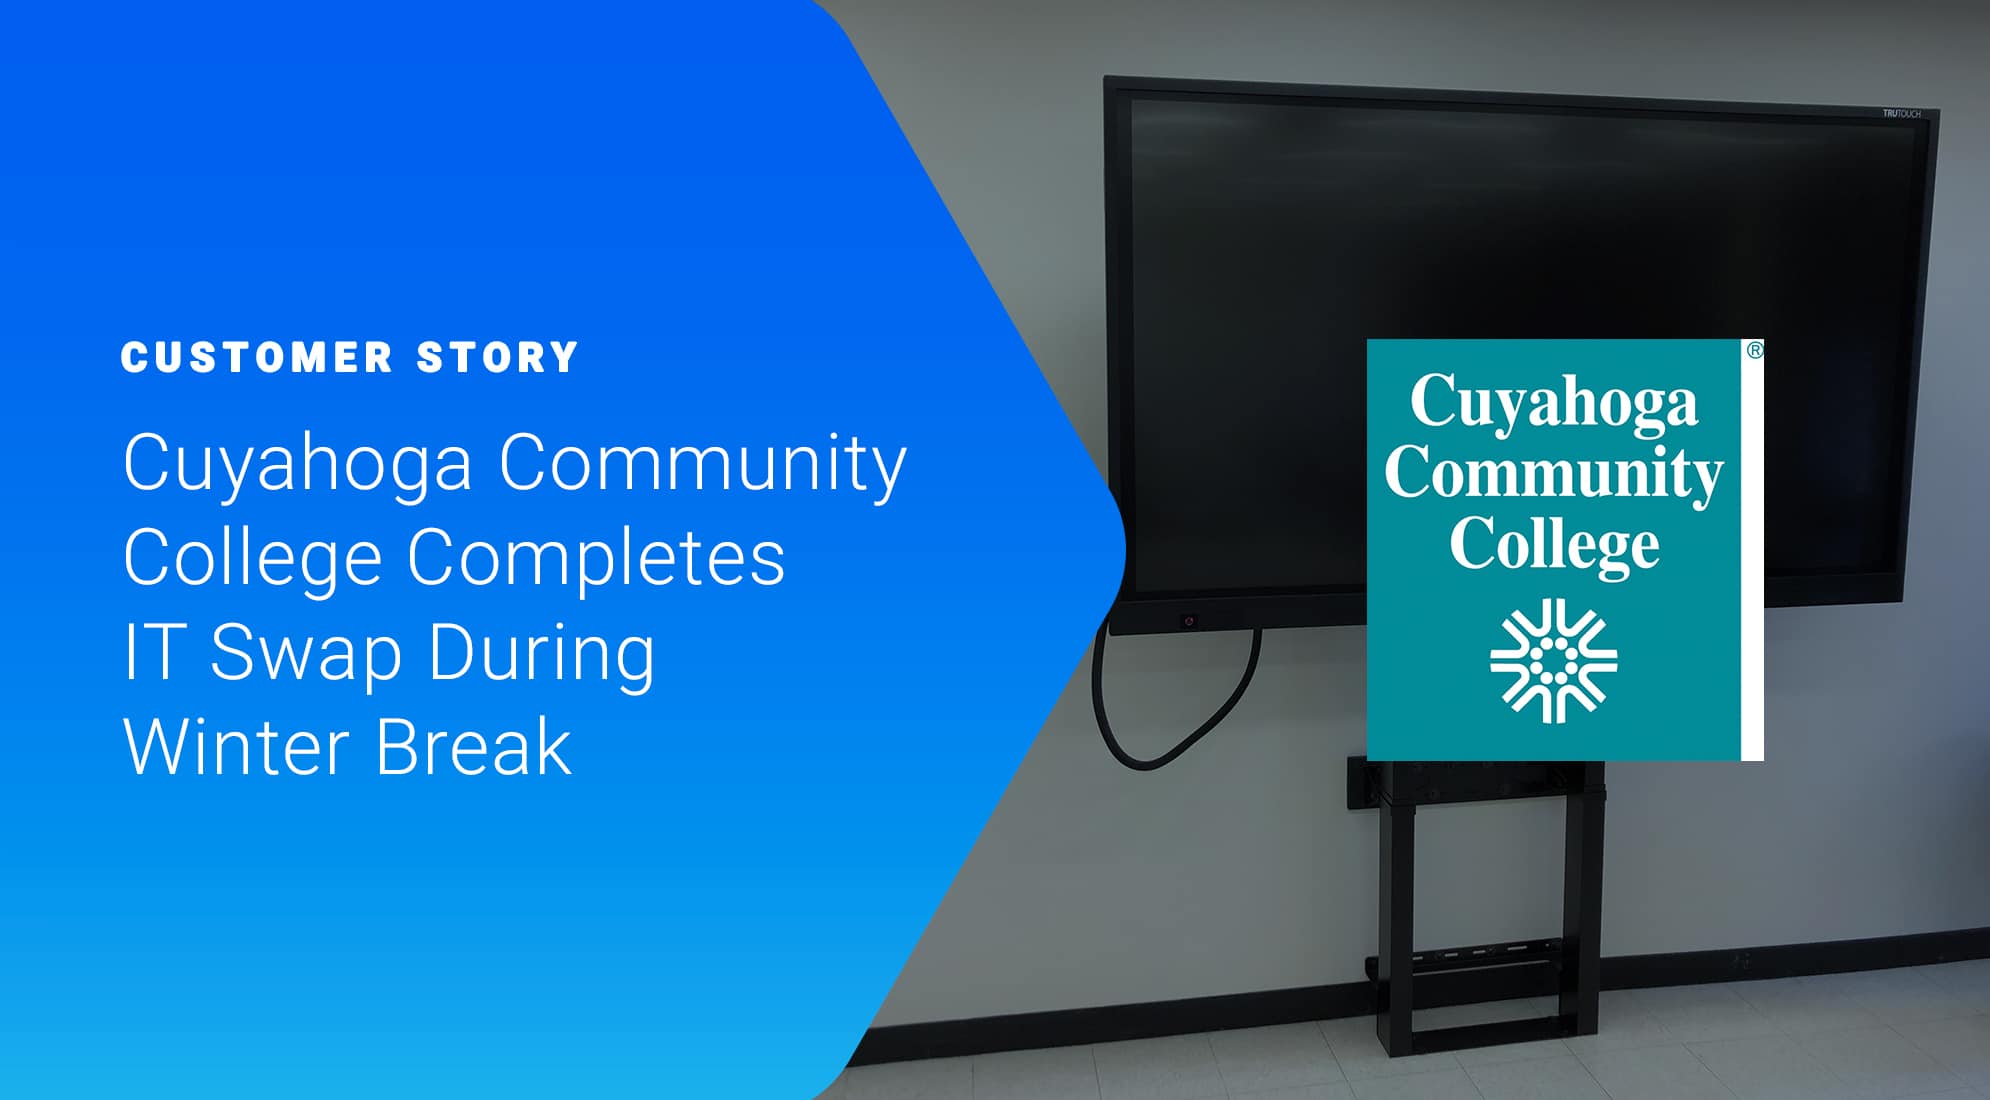 Cuyahoga Community College Completes Classroom Upgrades During Winter Break